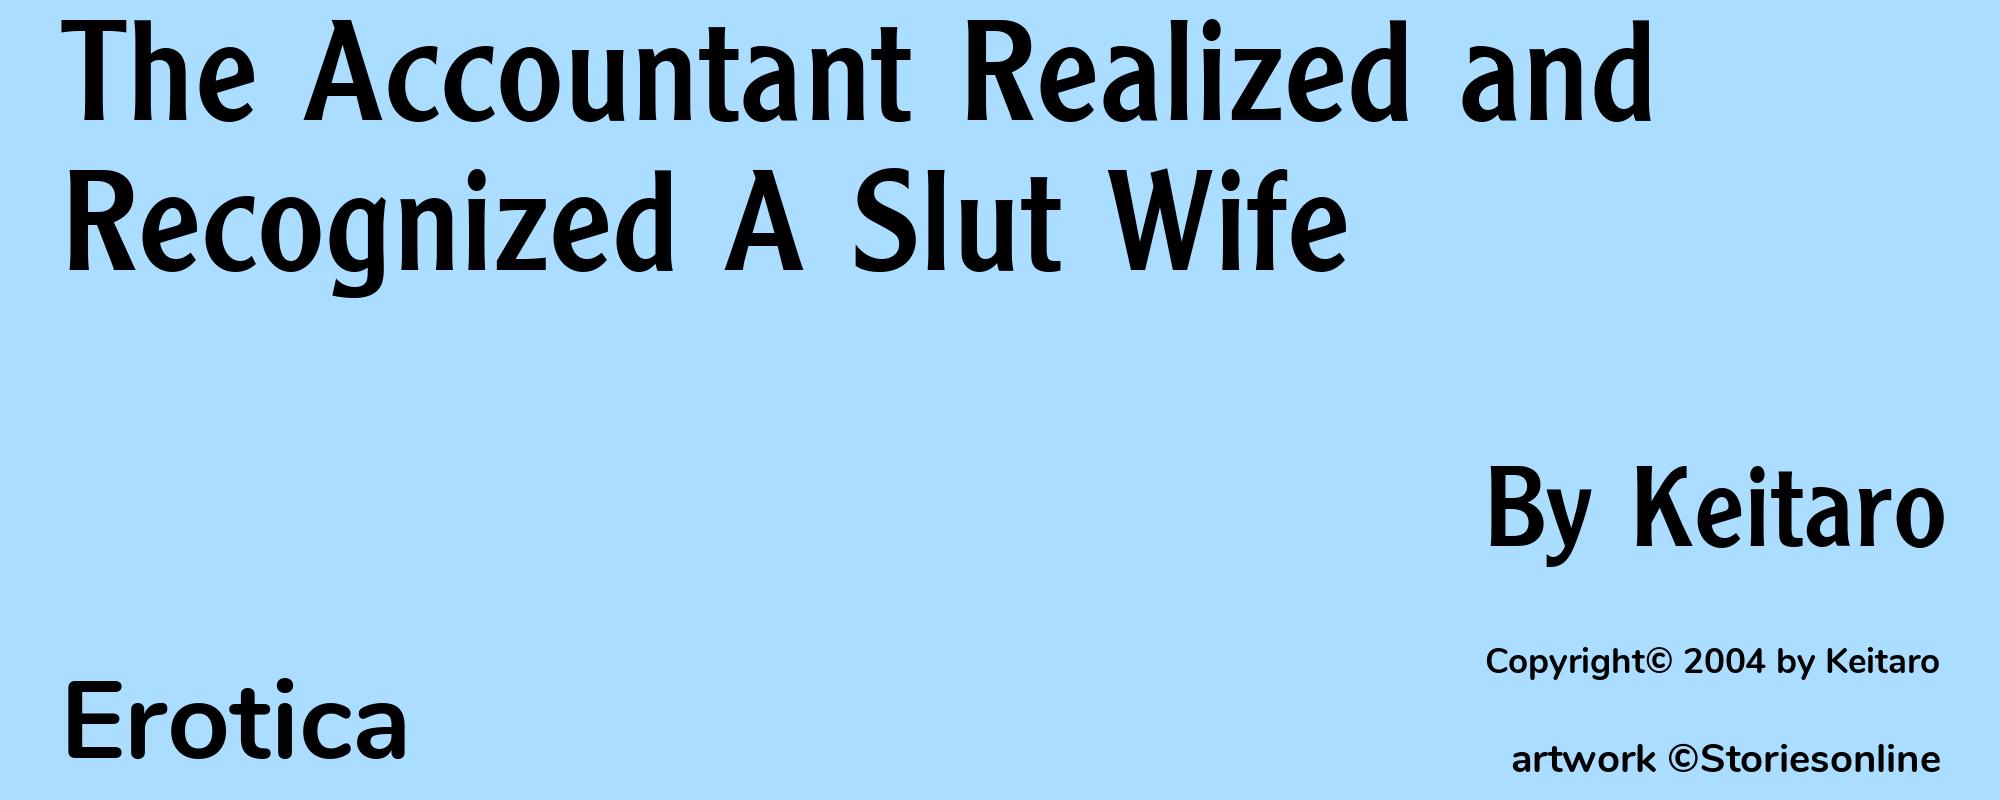 The Accountant Realized and Recognized A Slut Wife - Cover